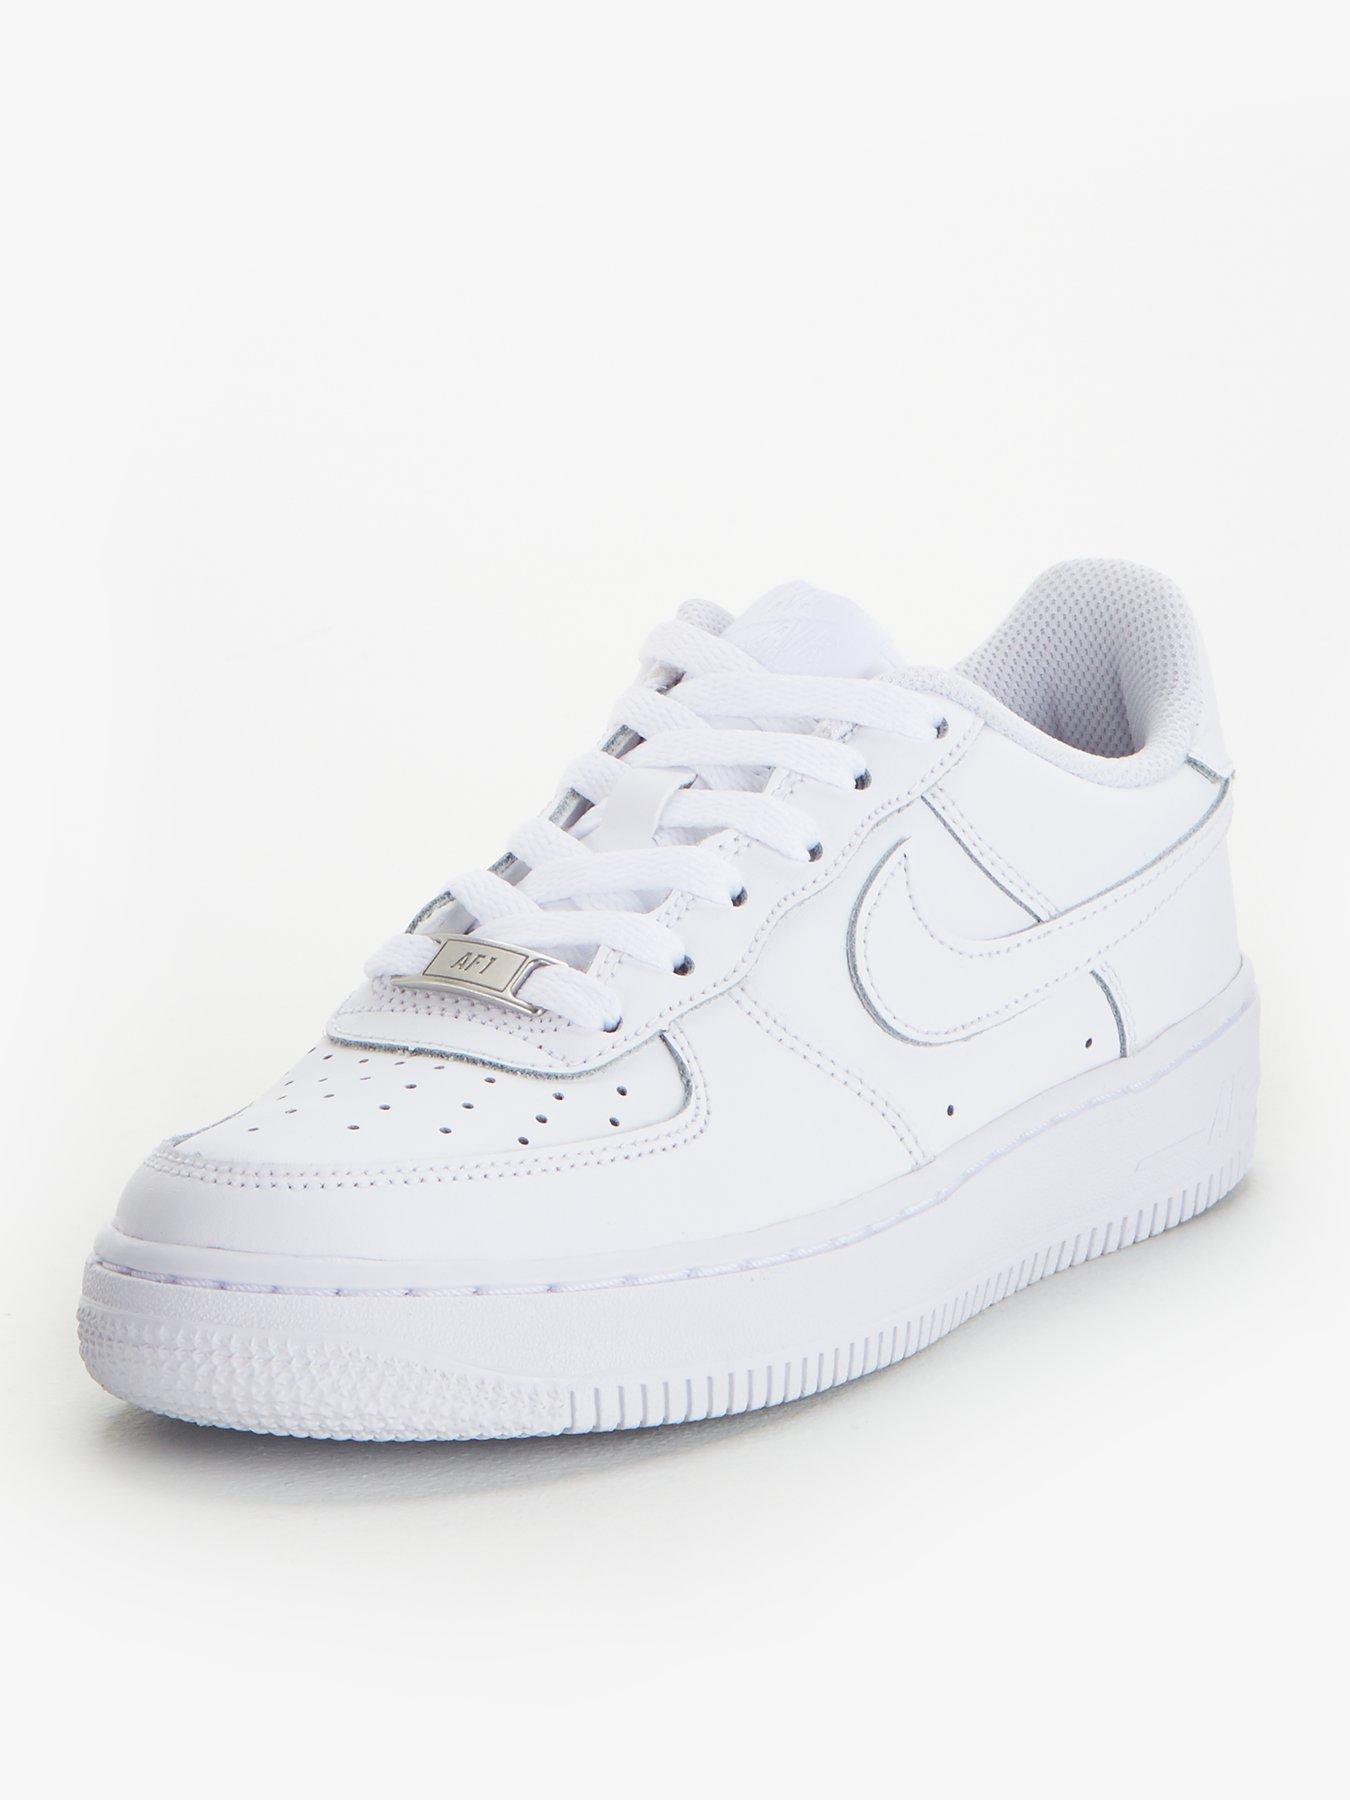 Nike Air Force 1 (GS) Junior Shoe - White | very.co.uk